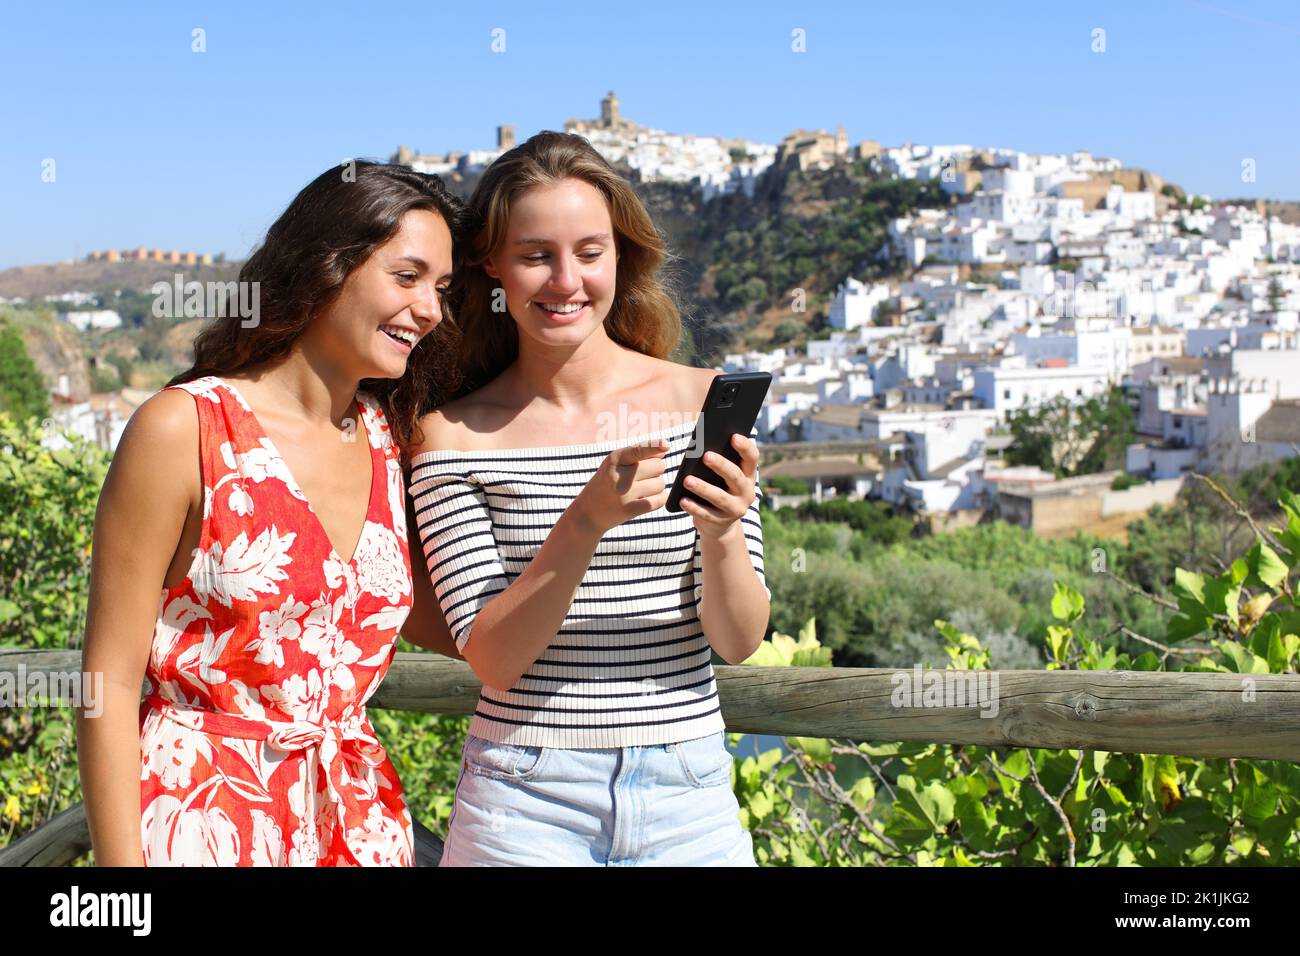 Two happy tourists checking smart phone on summer vacation outdoors Stock Photo